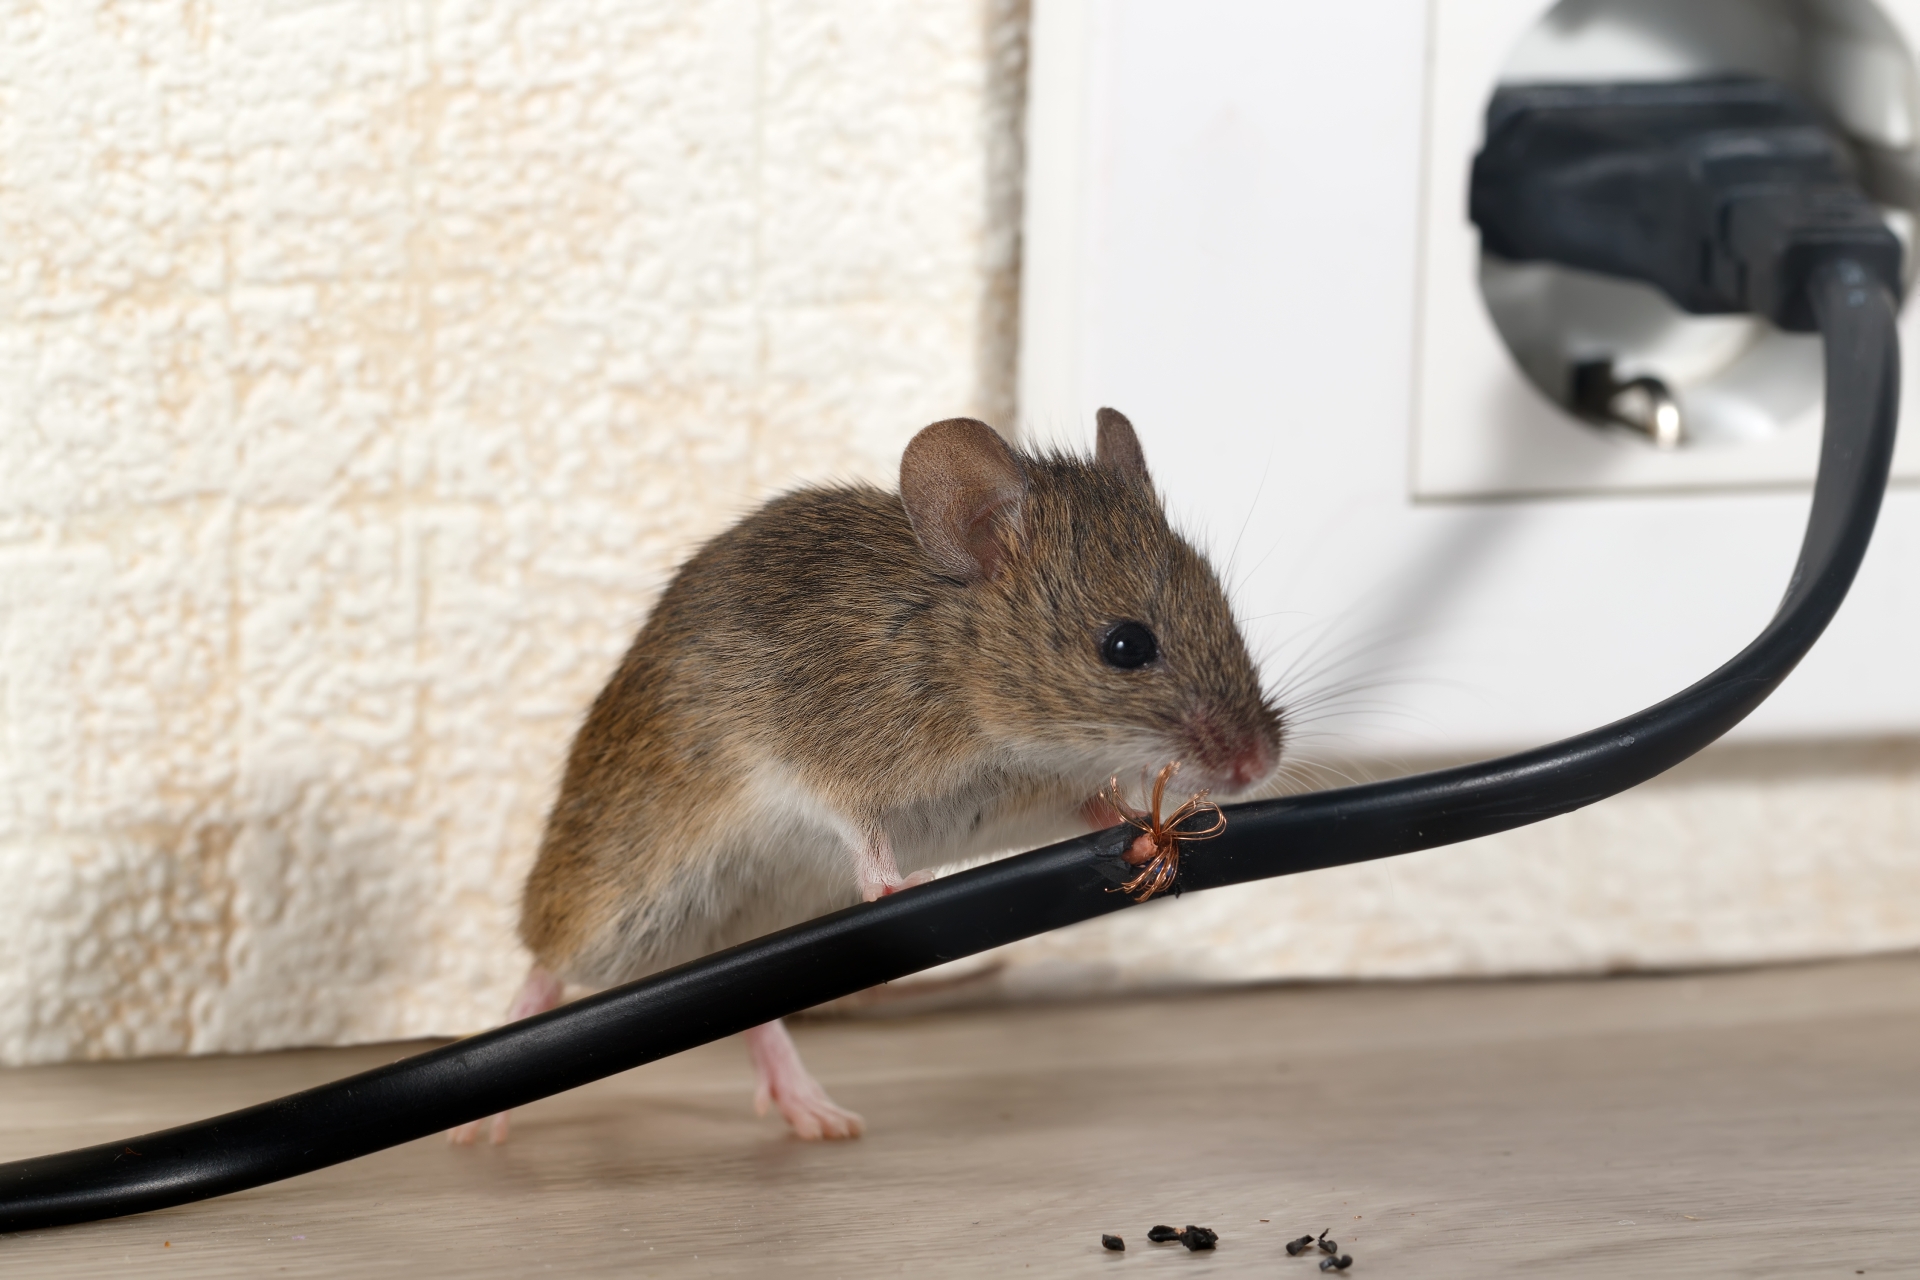 Mice Infestation, Pest Control in Raynes Park, South Wimbledon, SW20. Call Now 020 8166 9746